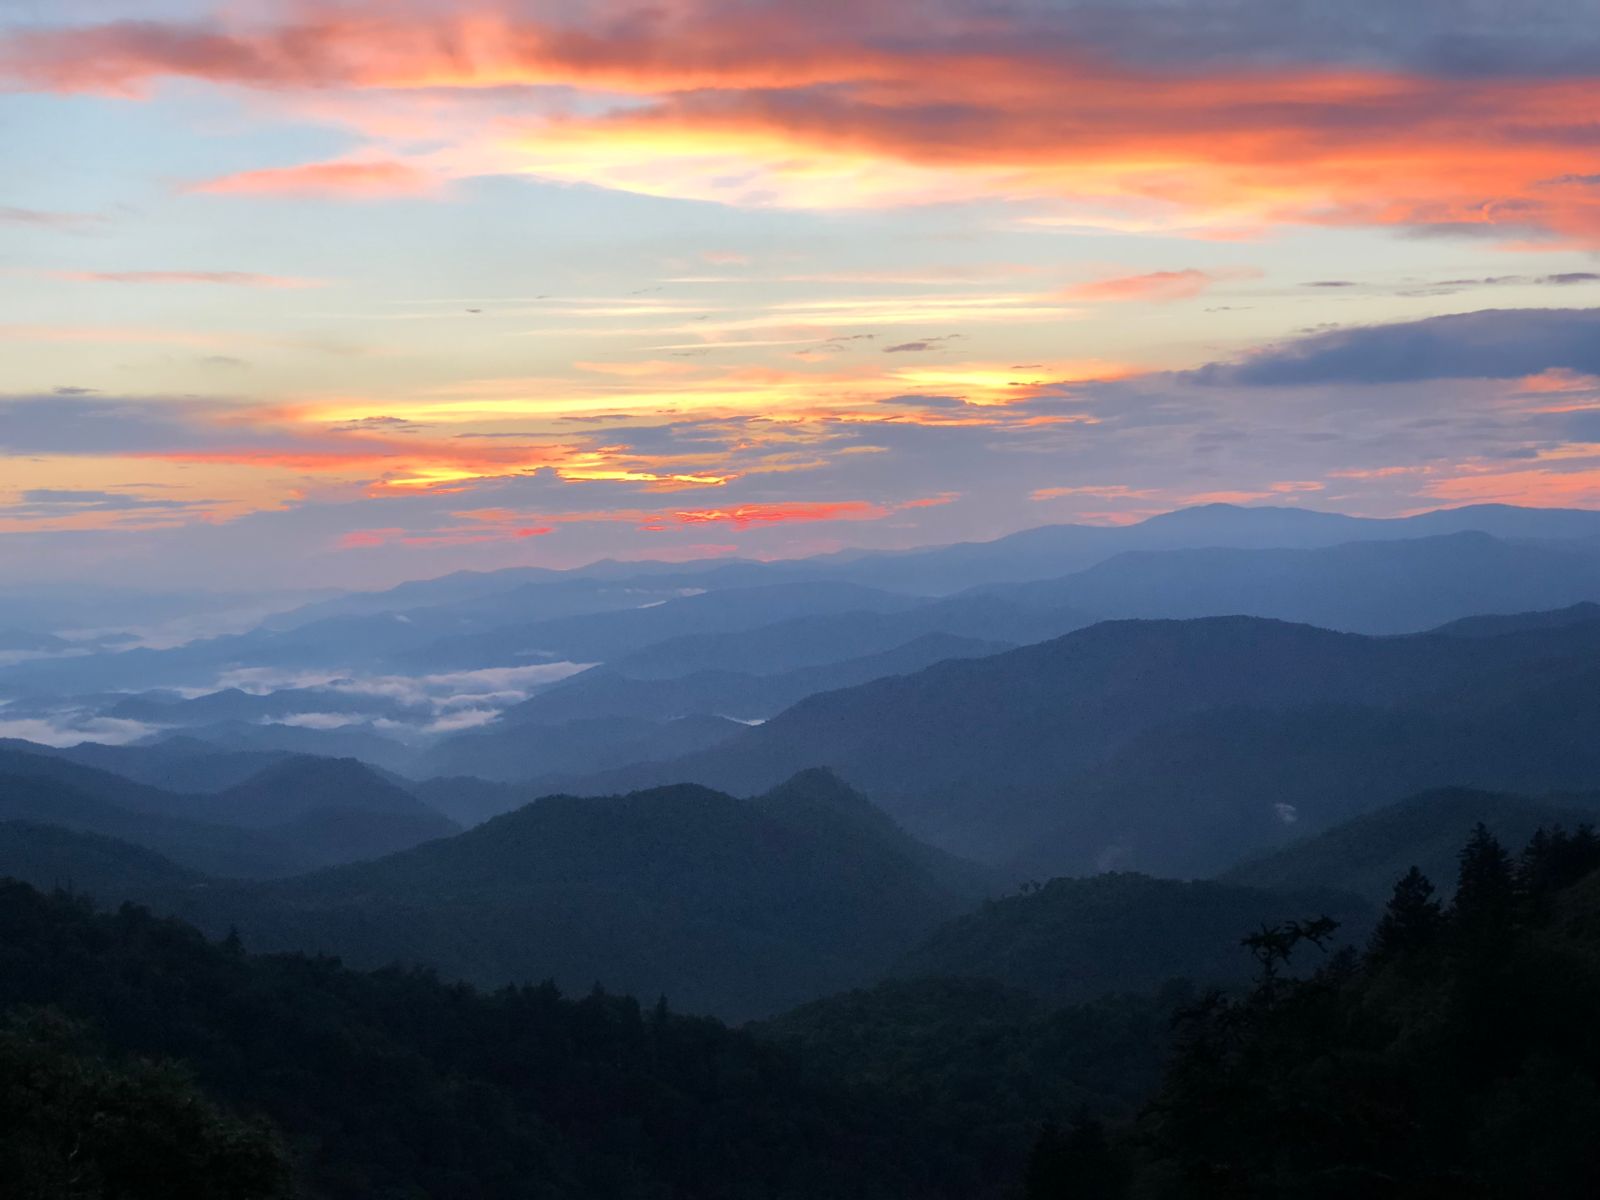 Sunset in Great Smoky Mountains National Park - photo by Jason Frye